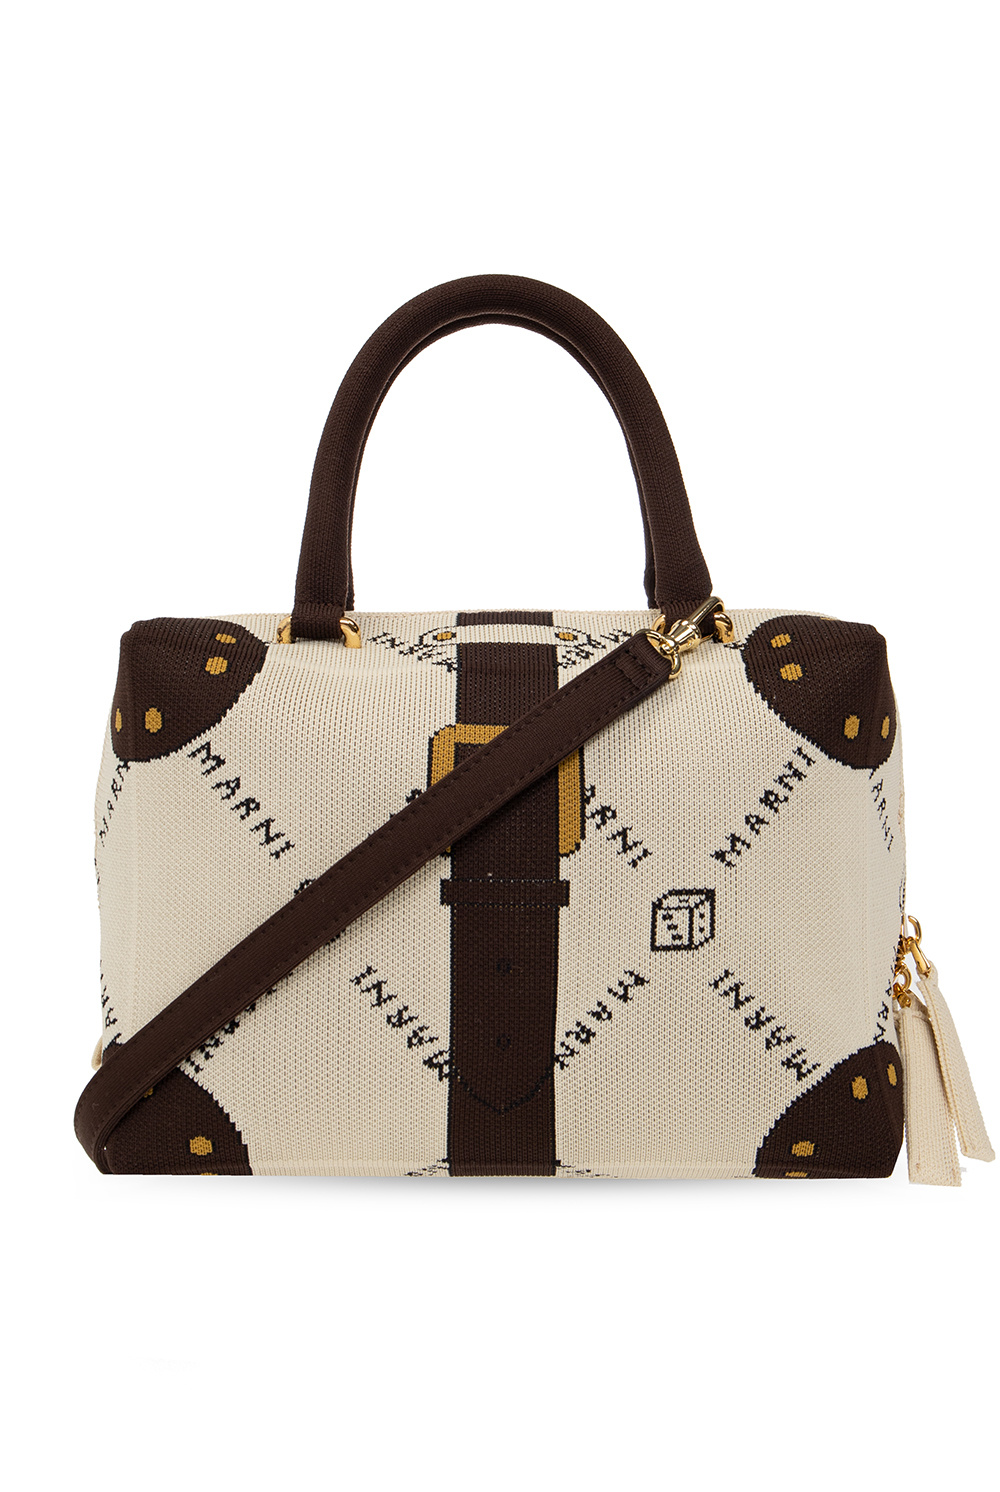 Louis Vuitton Collection tote tri color, 3 matieres. Brown